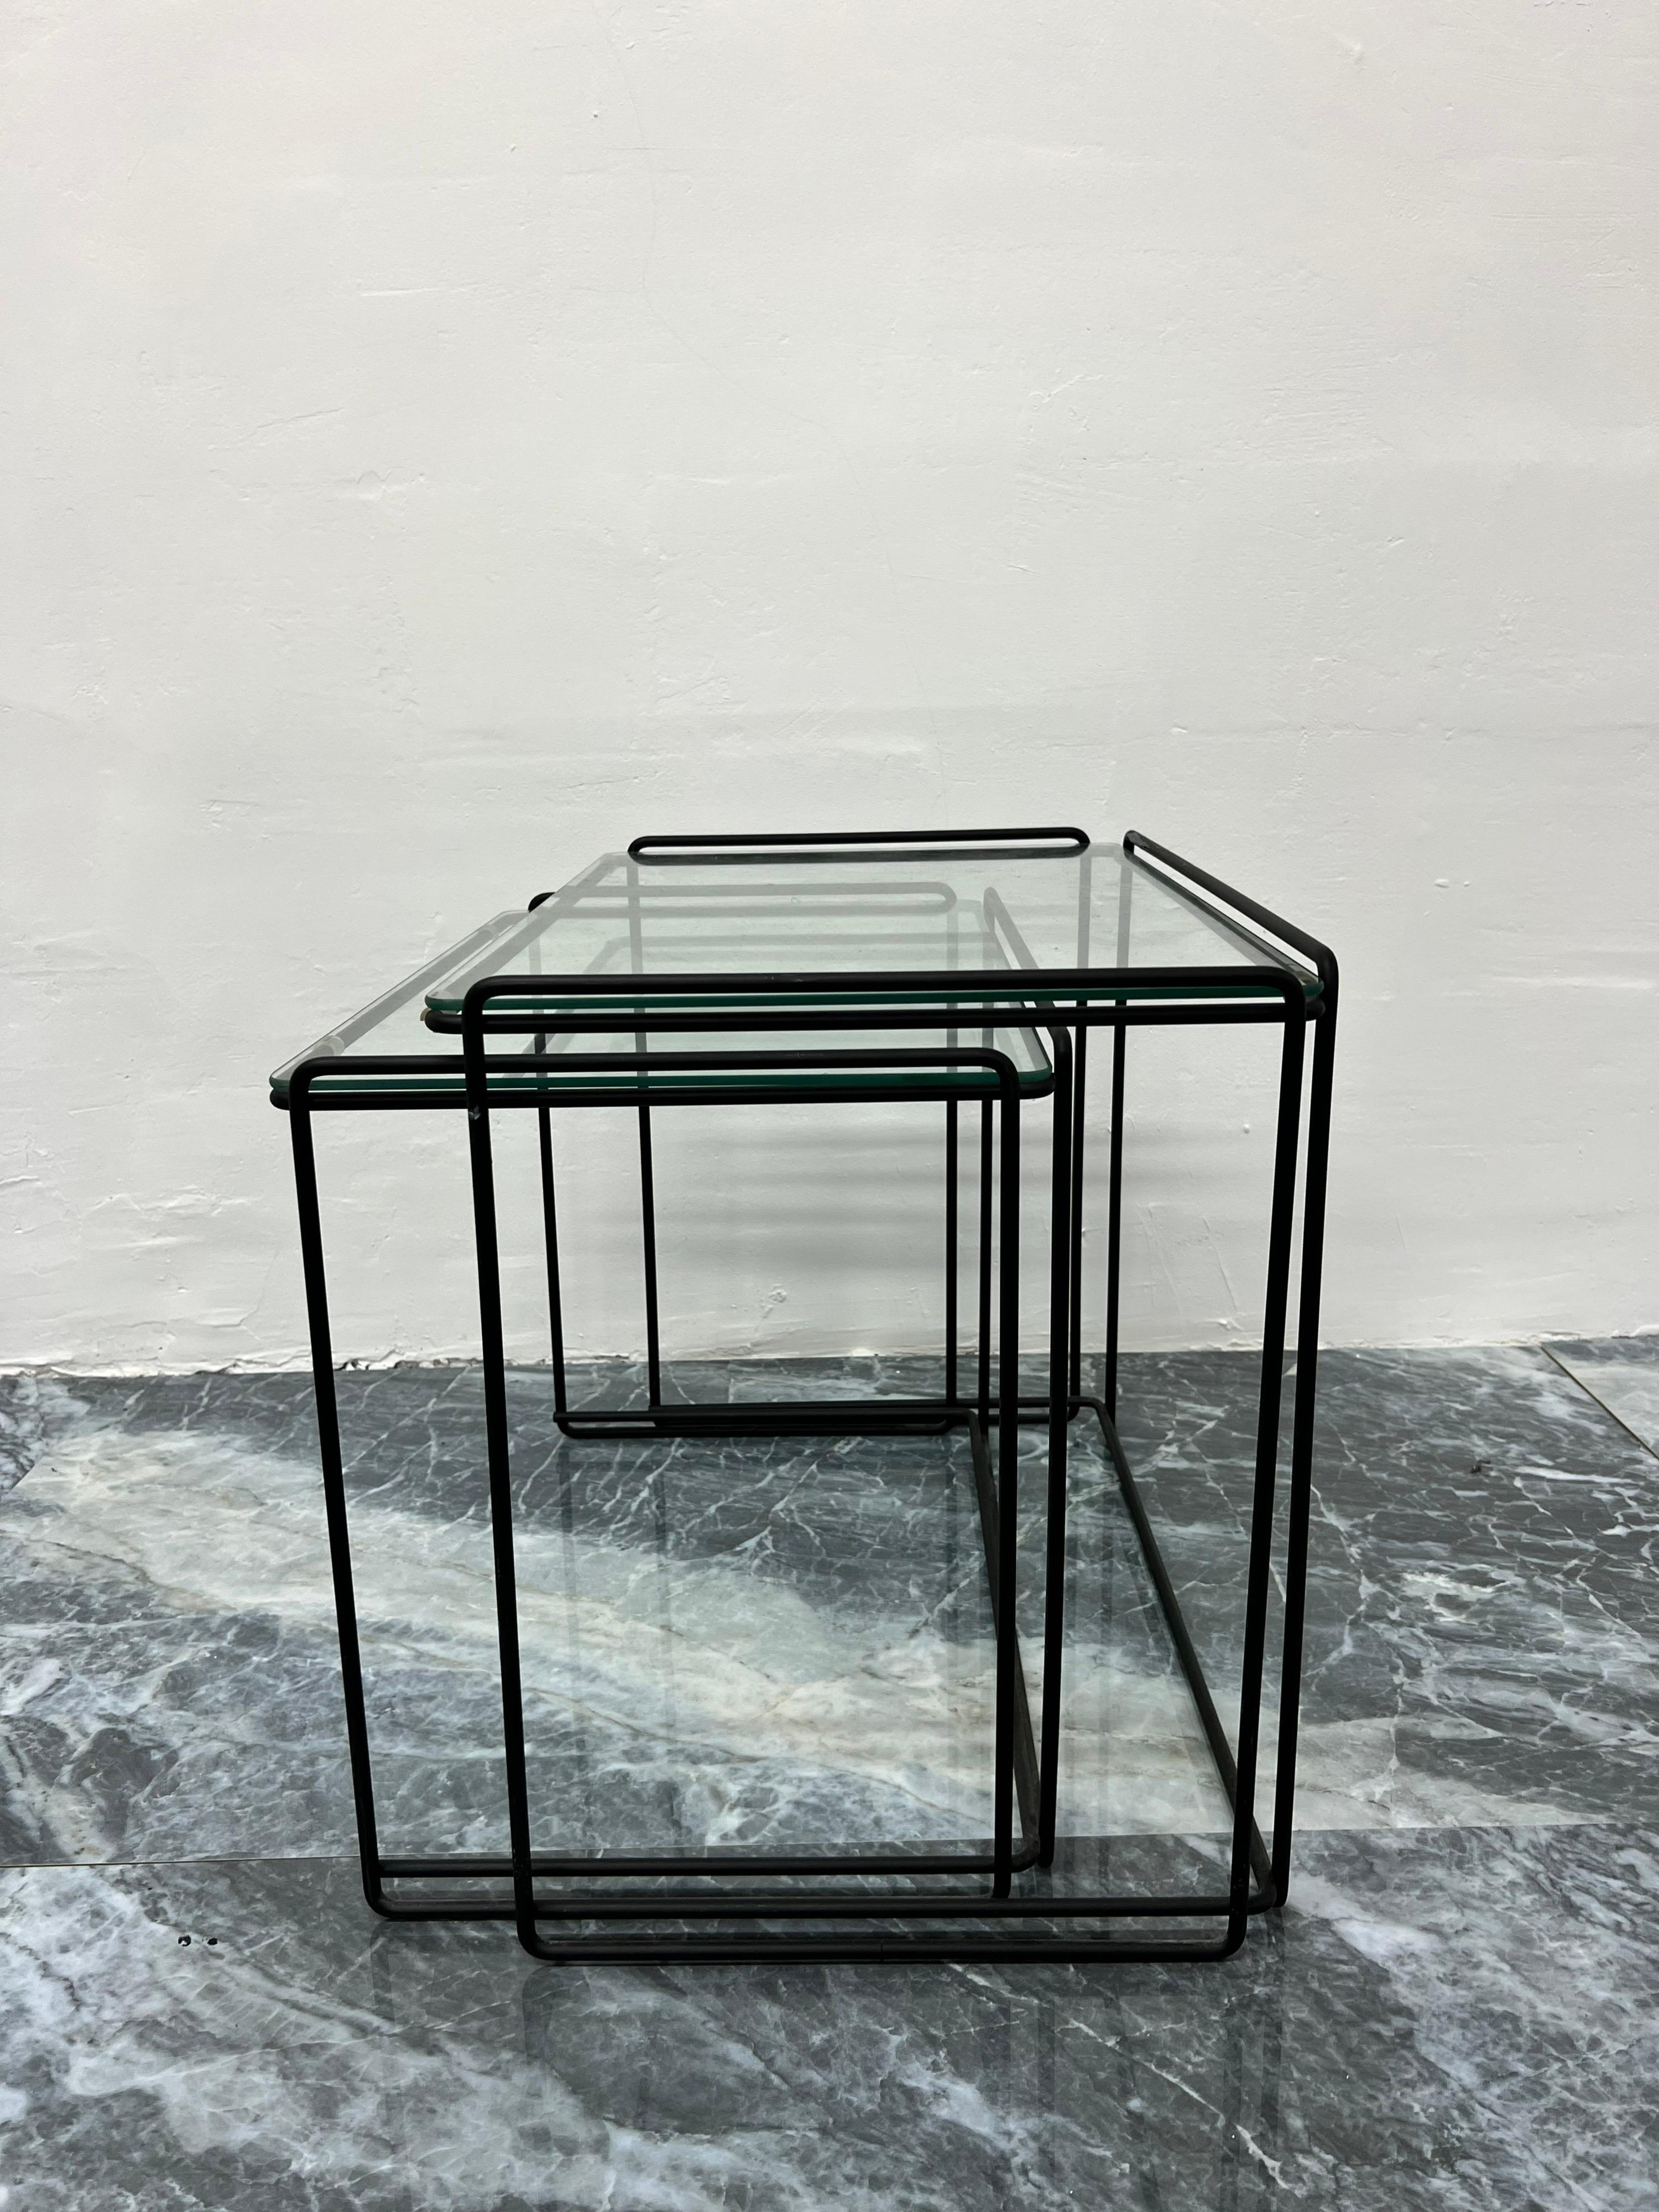 Glass Max Sauze 'Isocele' Nesting Tables, 1970s For Sale